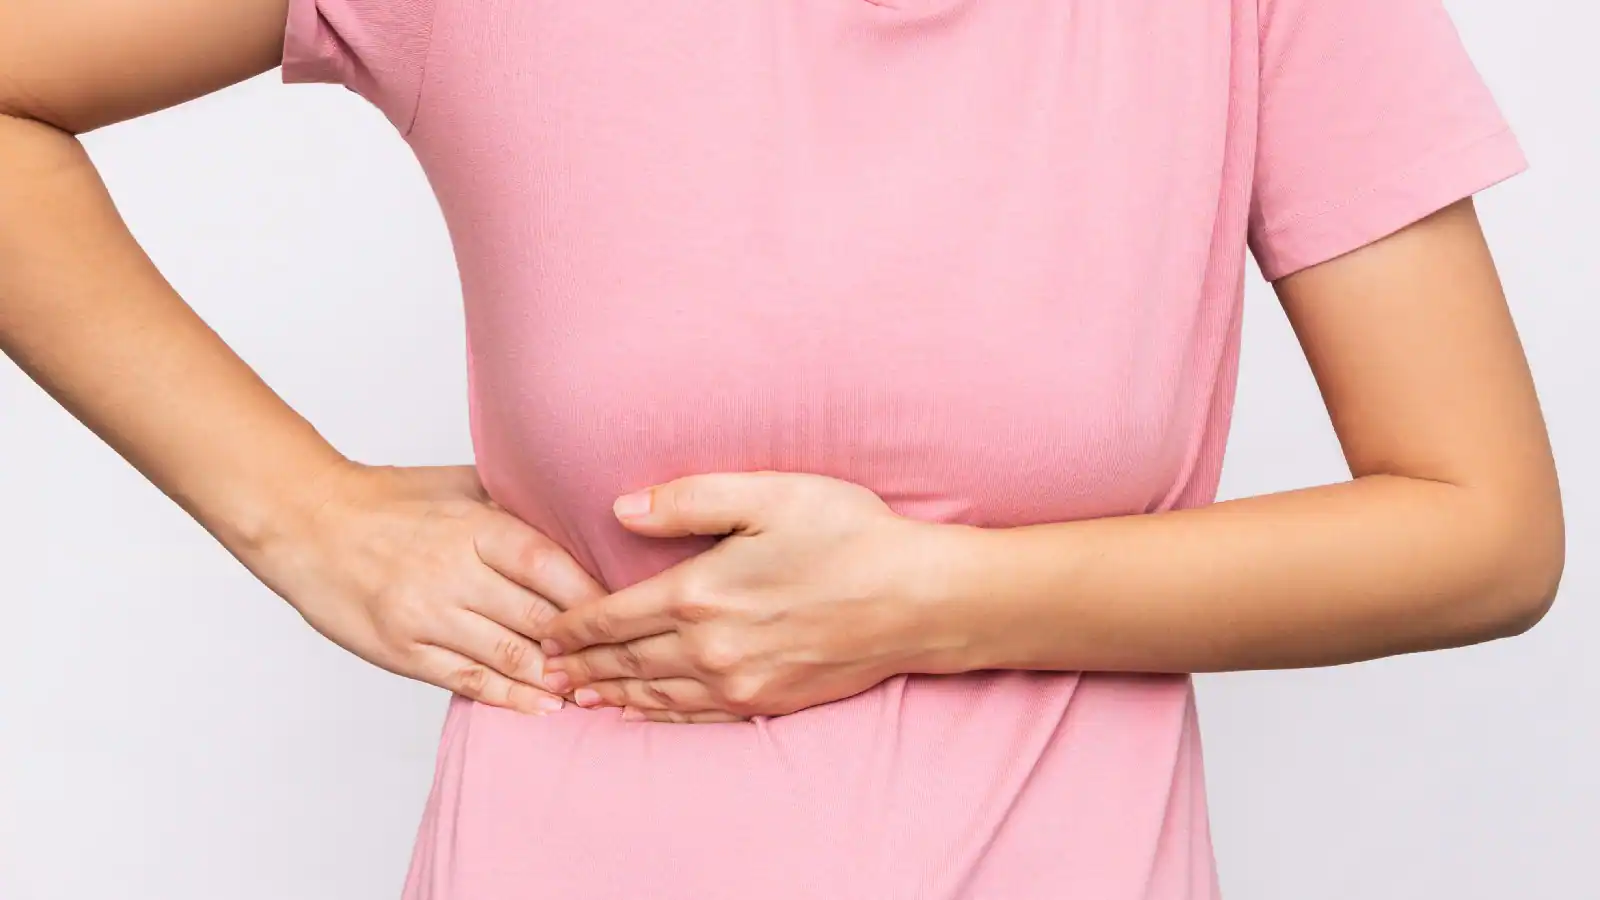 What Hurts When Your Gallbladder Is Acting Up?